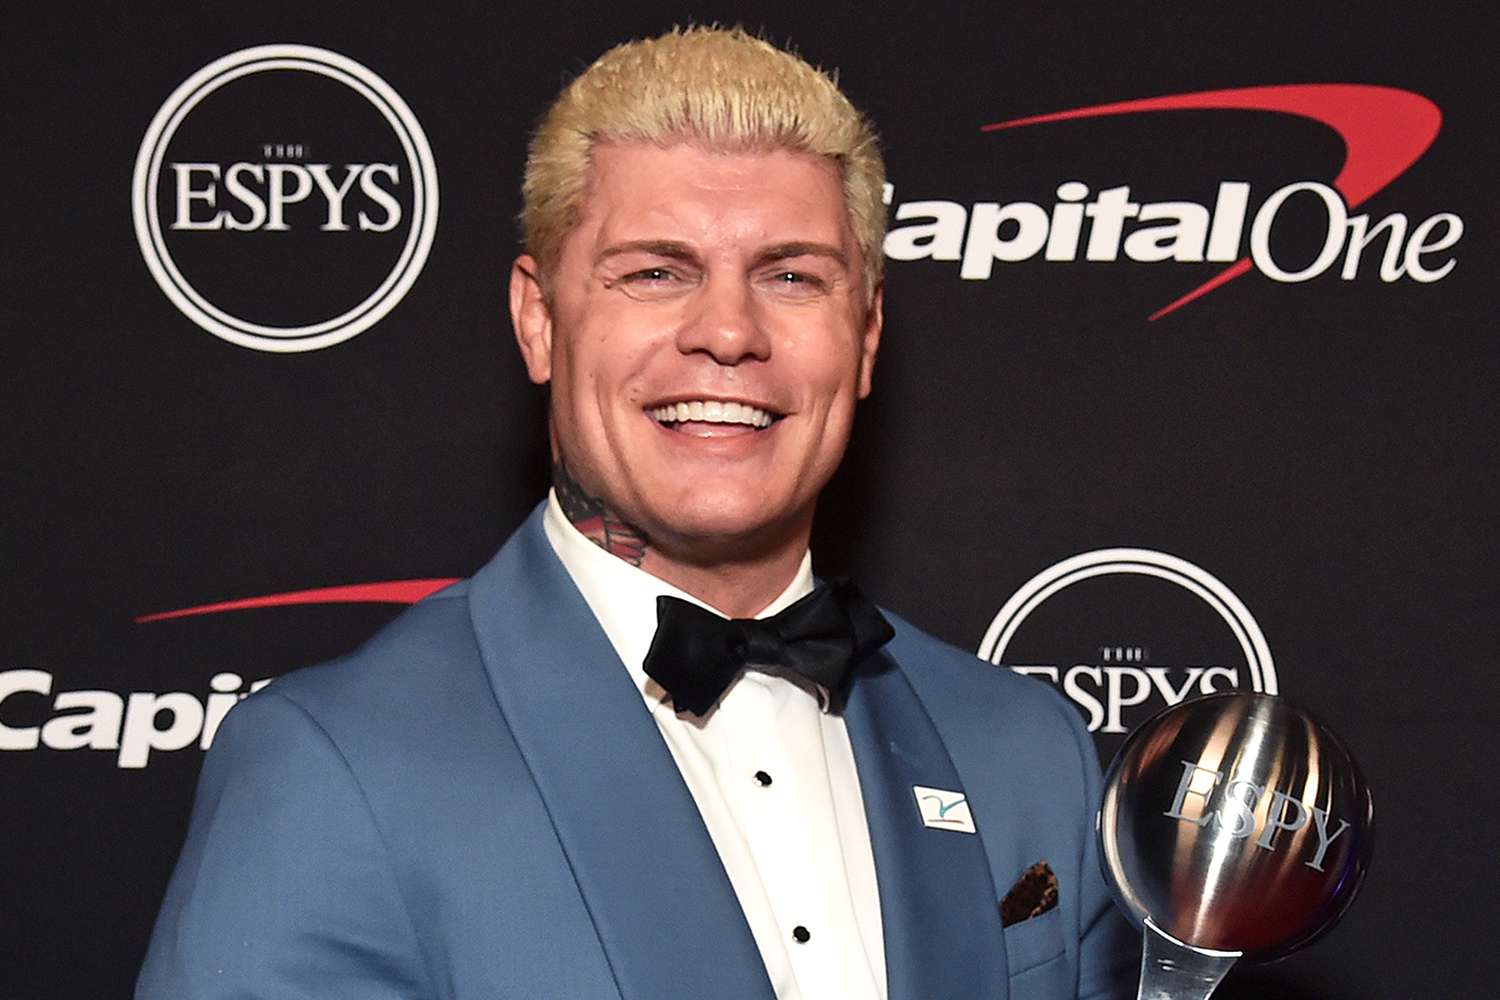 cody-rhodes-expresses-gratitude-for-fan-support-amid-rock-storyline-controversy